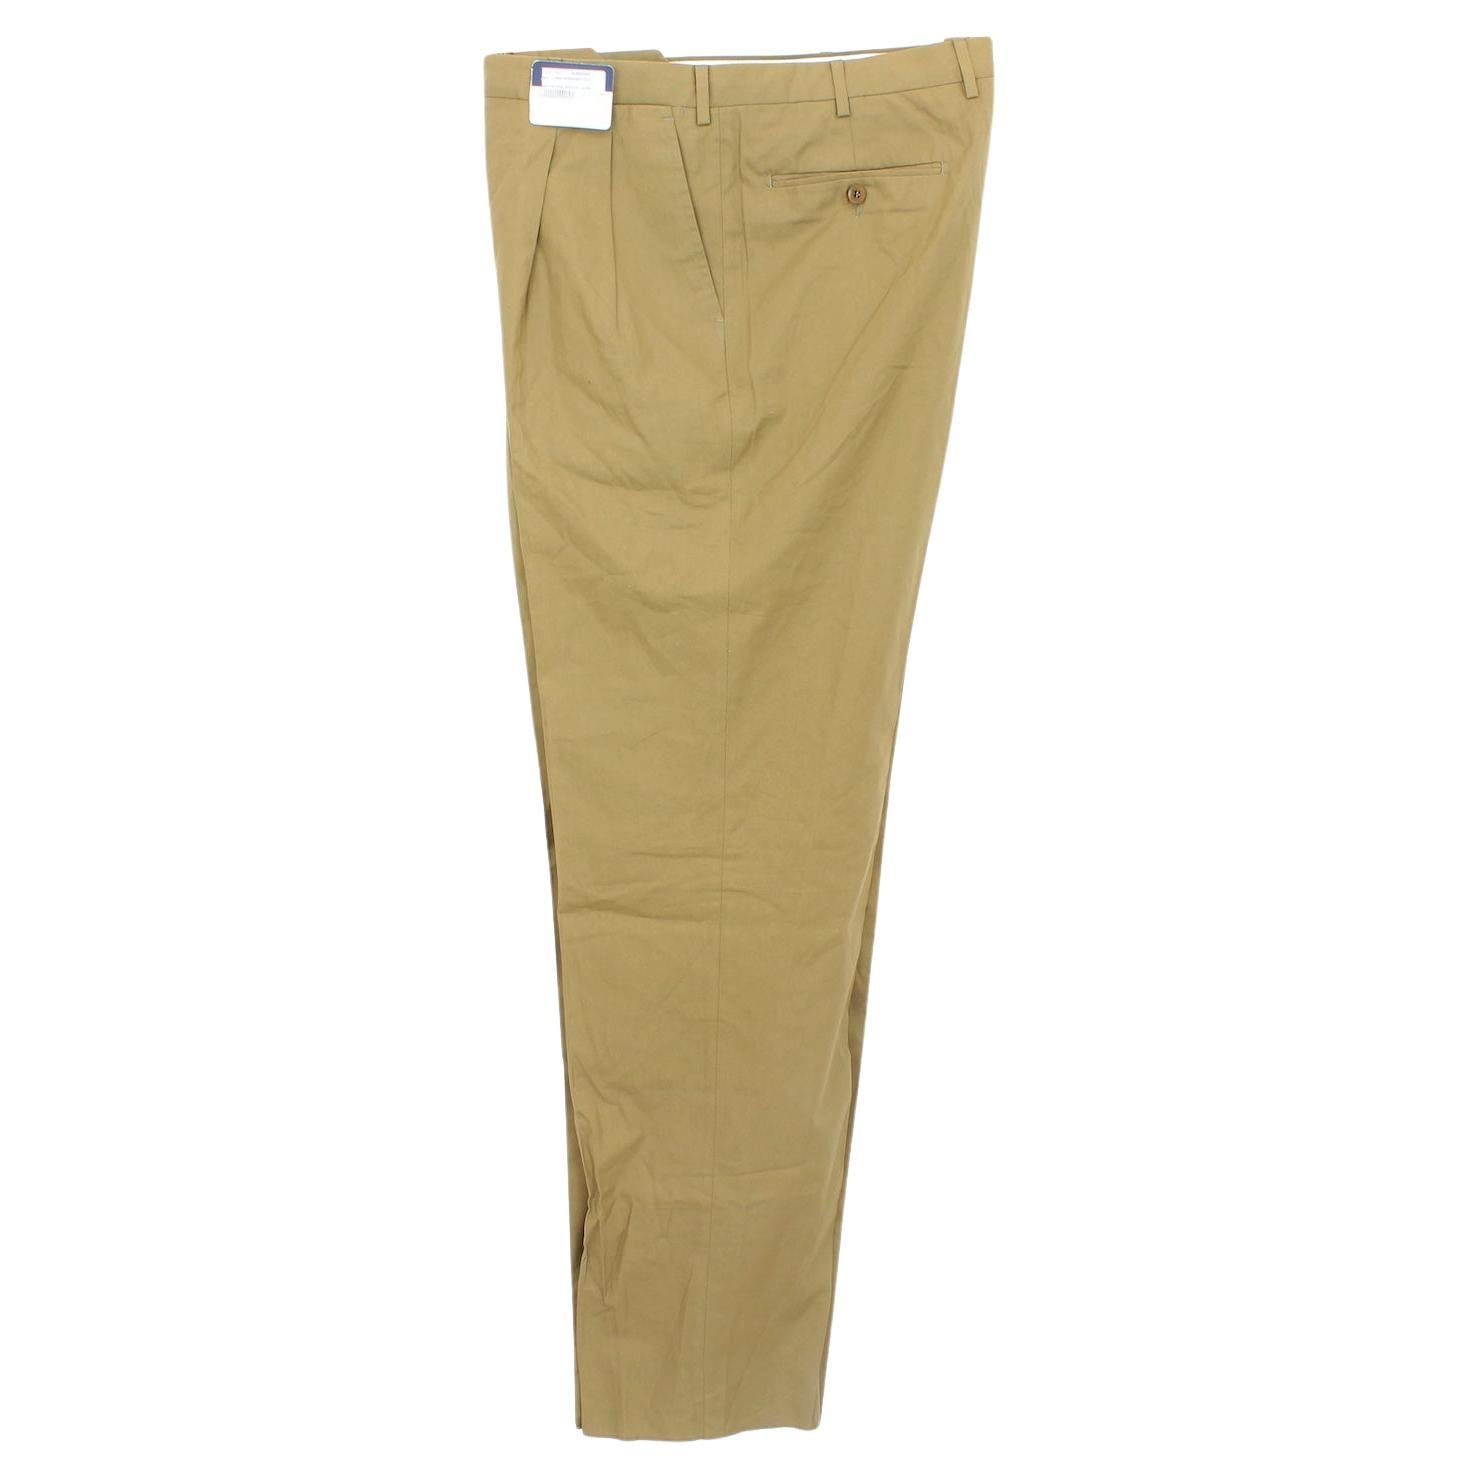 Burberry Beige Cotton Trousers 1990s